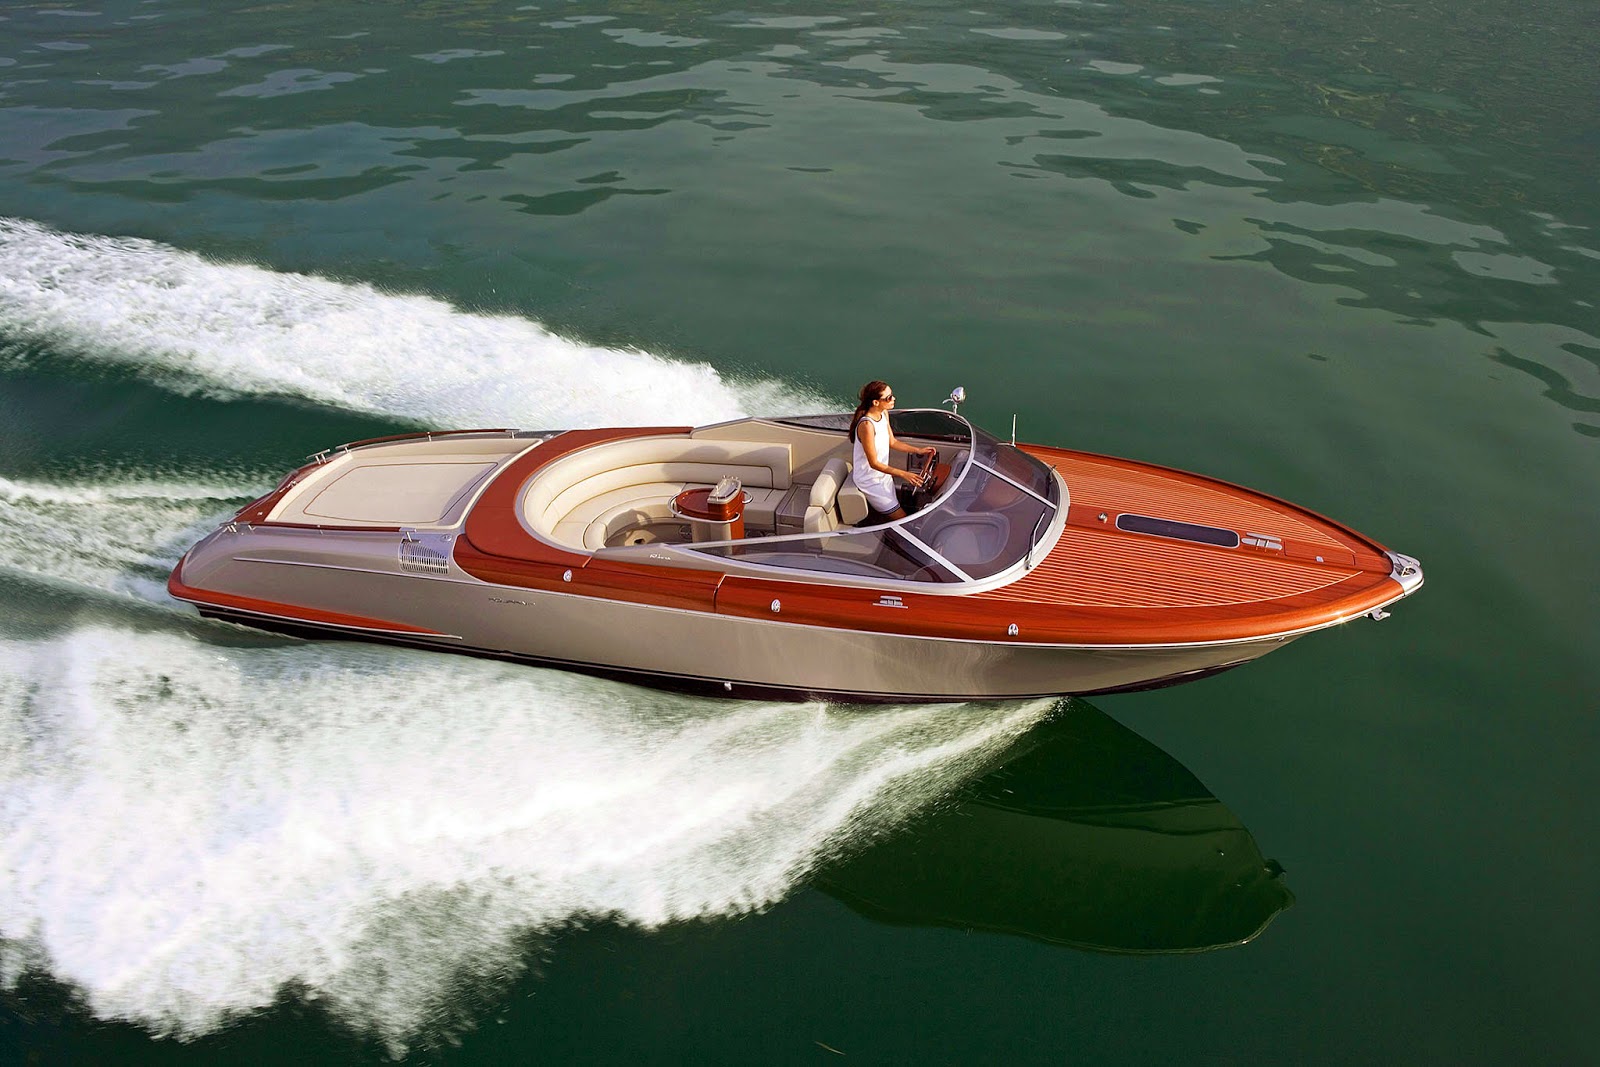 Welcome to RolexMagazine.com: Carlo Riva Italian High-End Boat Builder